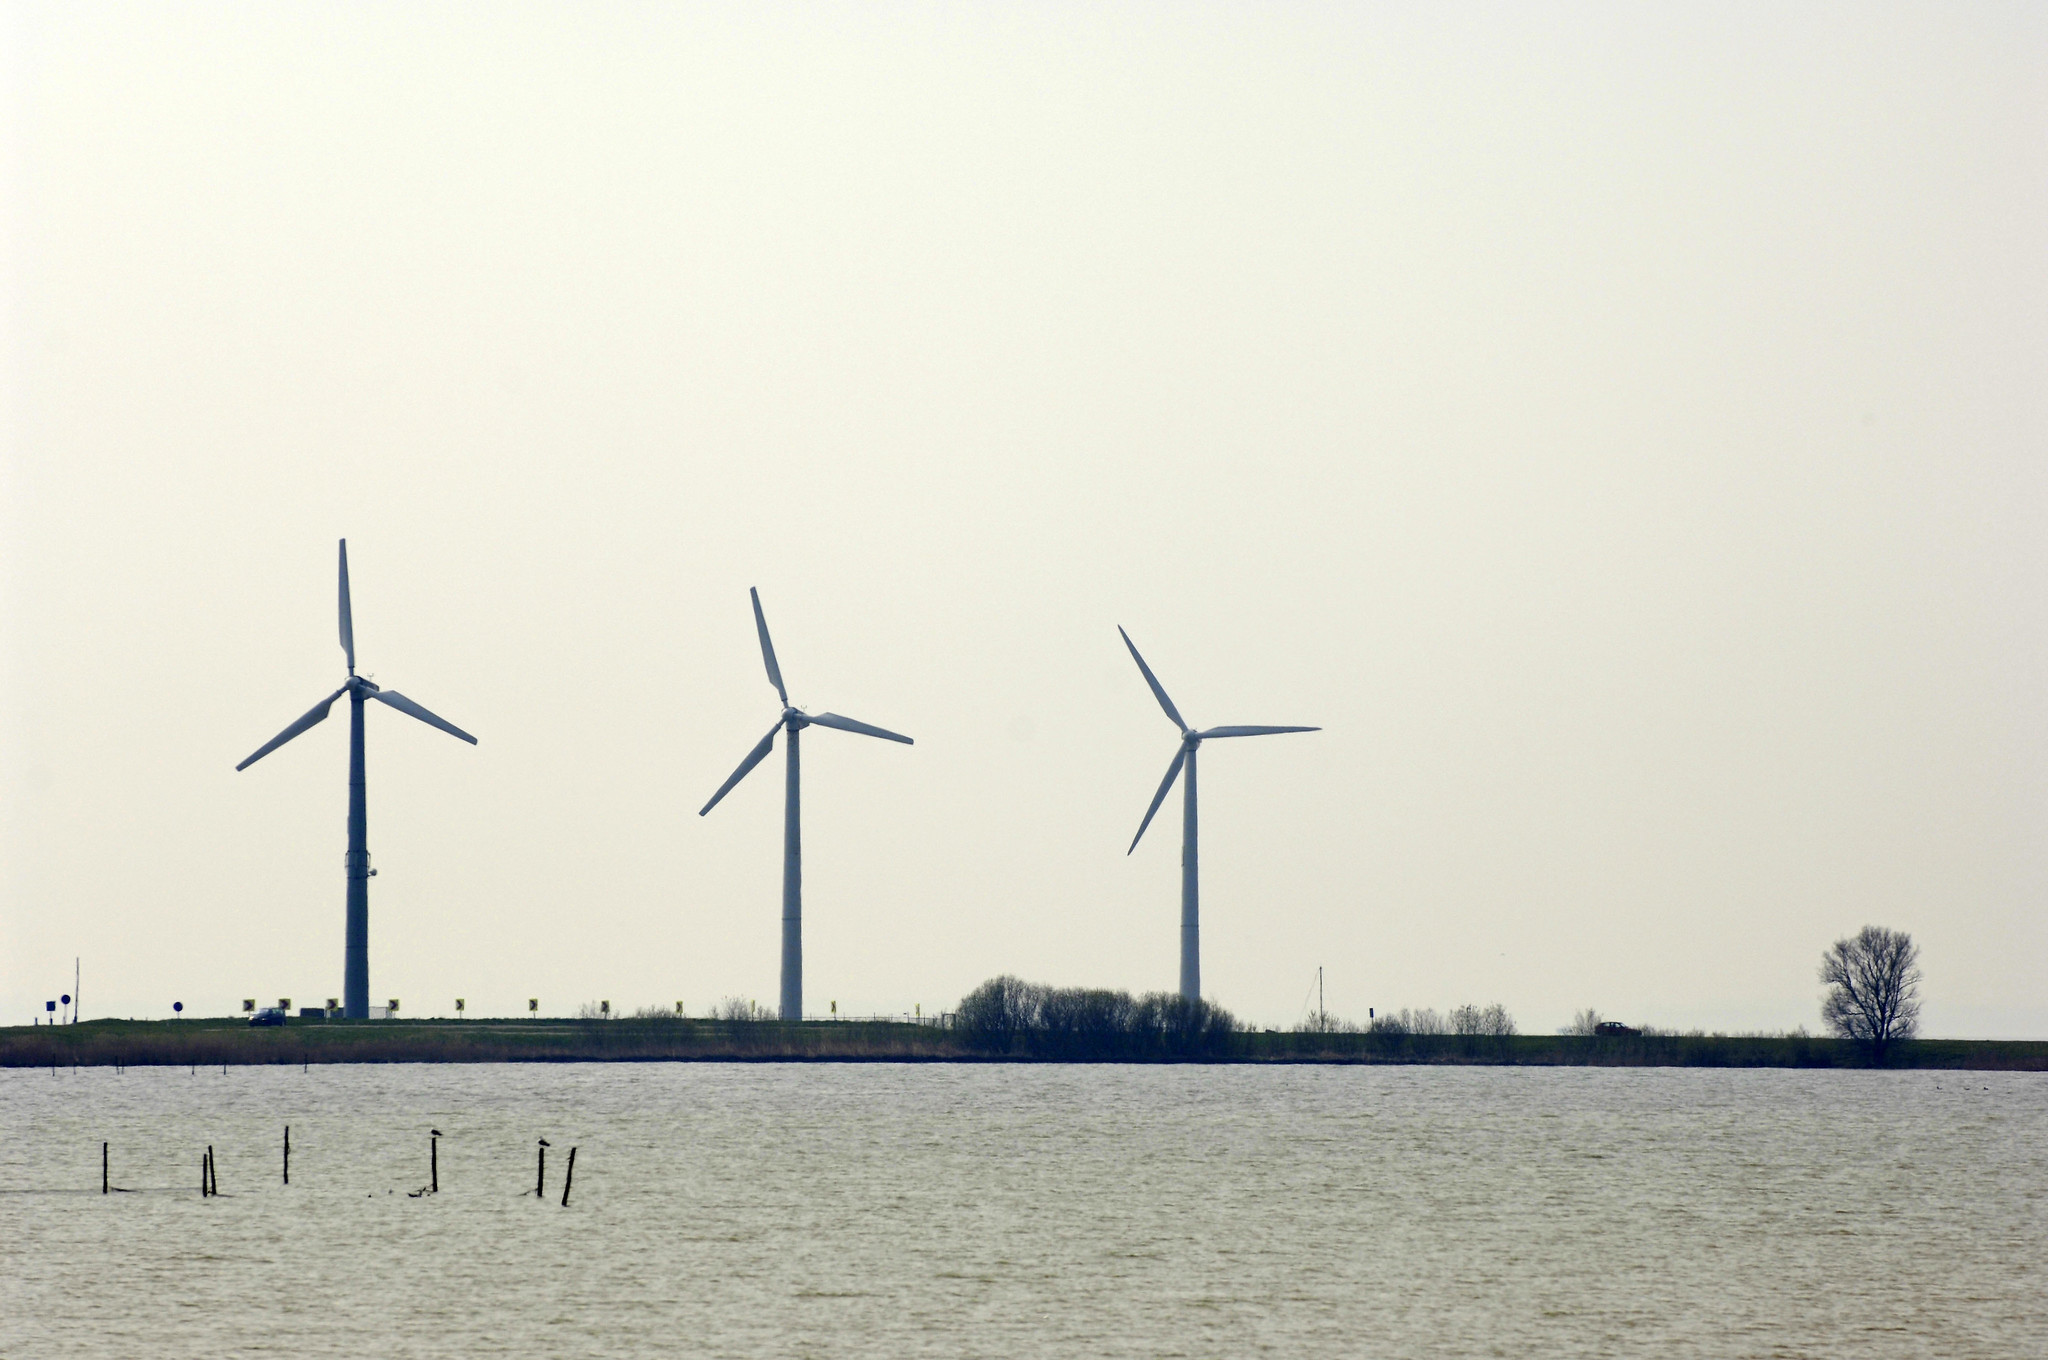 Lake view with three wind turbines on land (Netherlands)